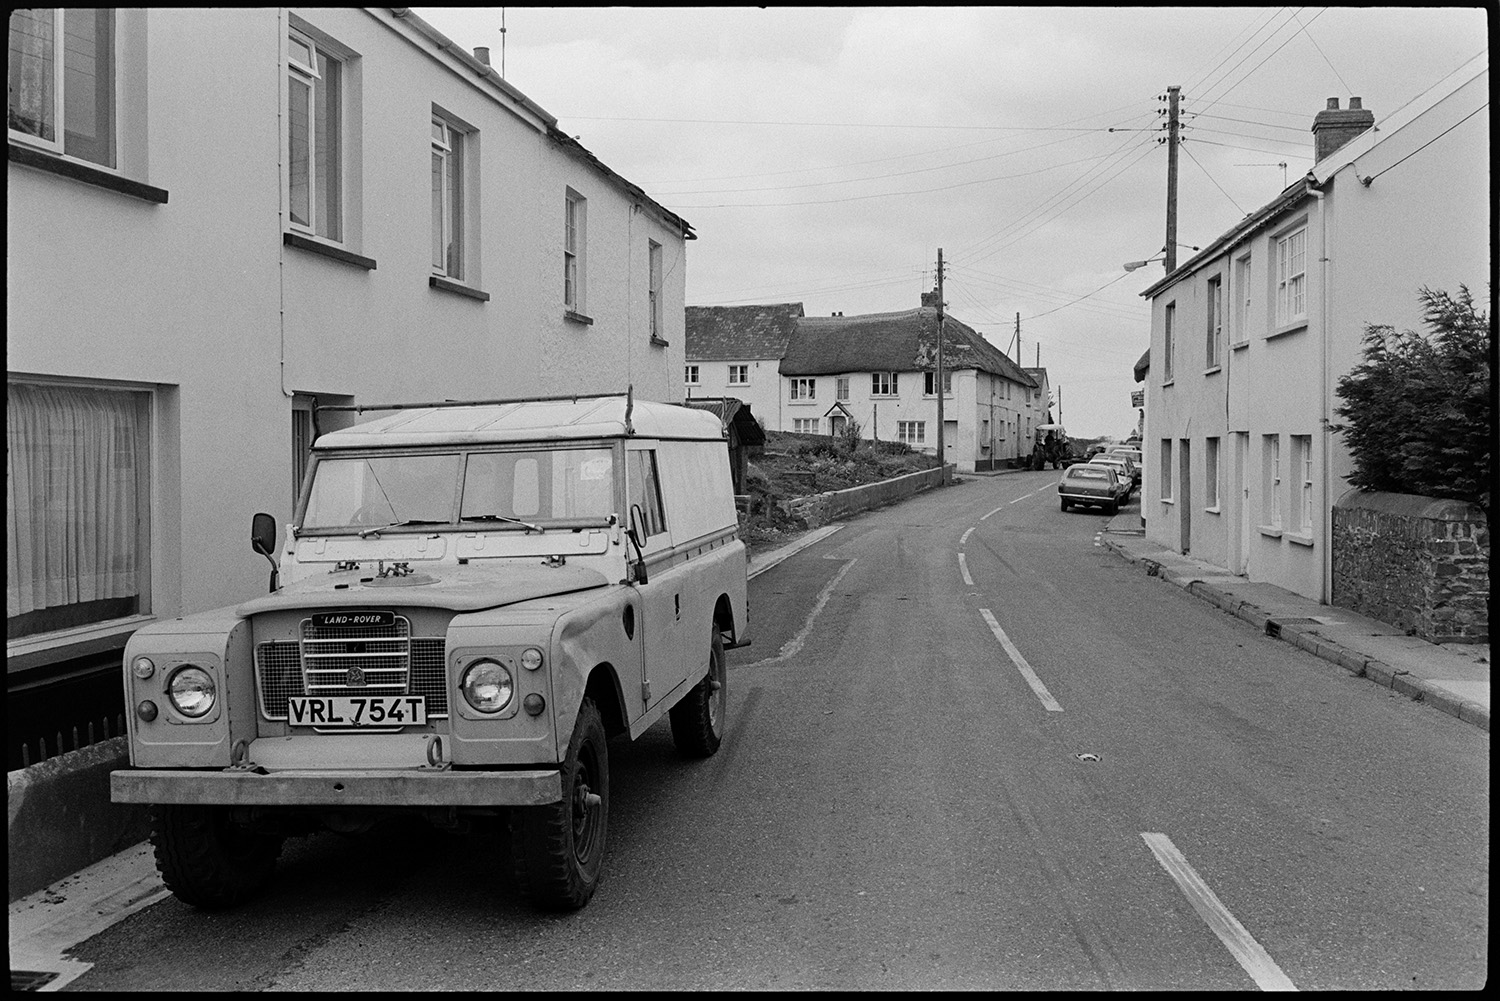 Street scenes with Land Rover. Comparison with old photos.
[A Land Rover parked in a street at Beaford with cottages, parked cars and a tractor driving up the road.]